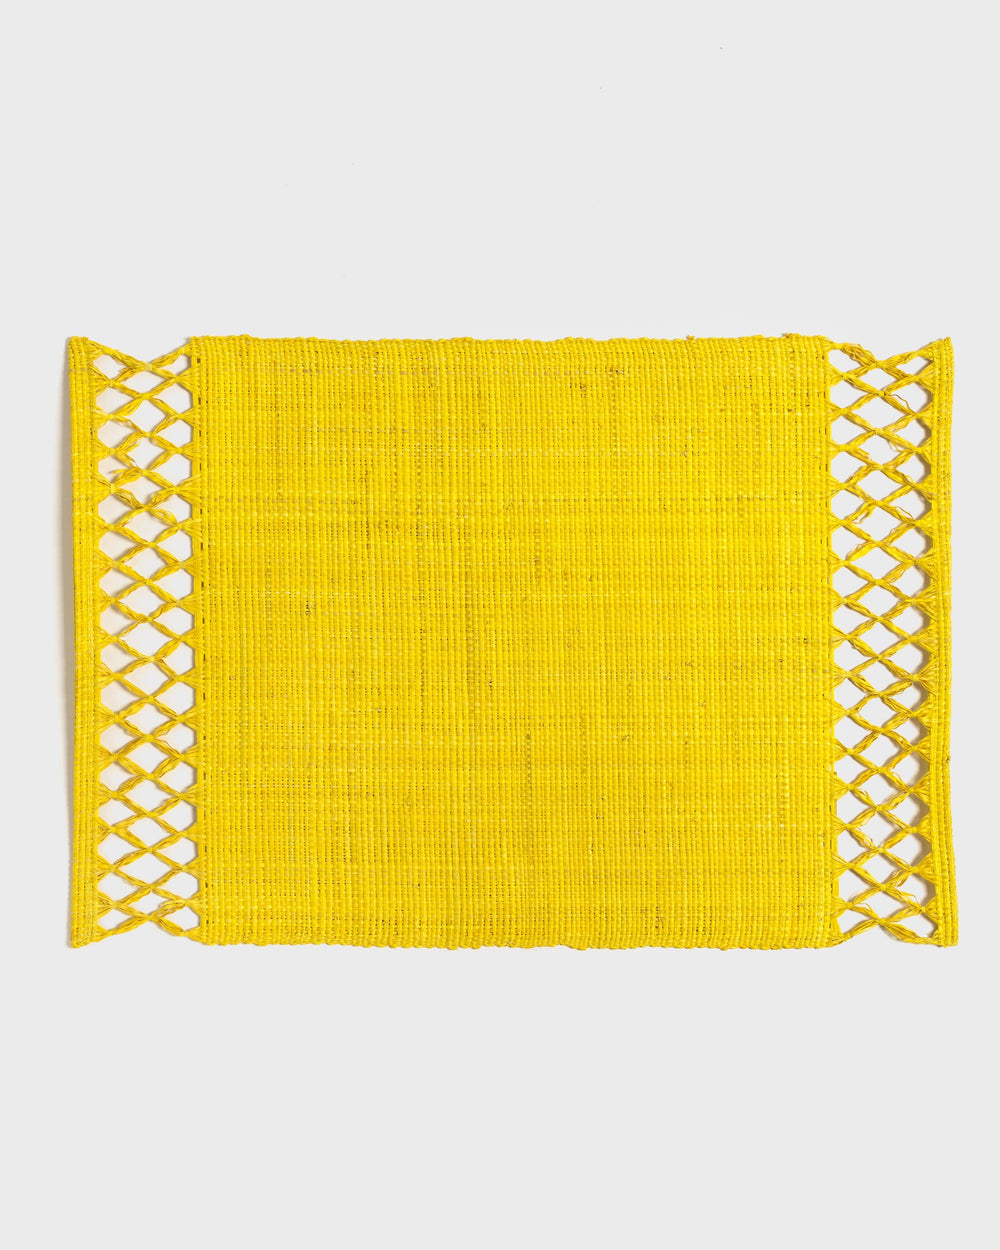 Tania Bulhoes Placemat Buzios Yellow